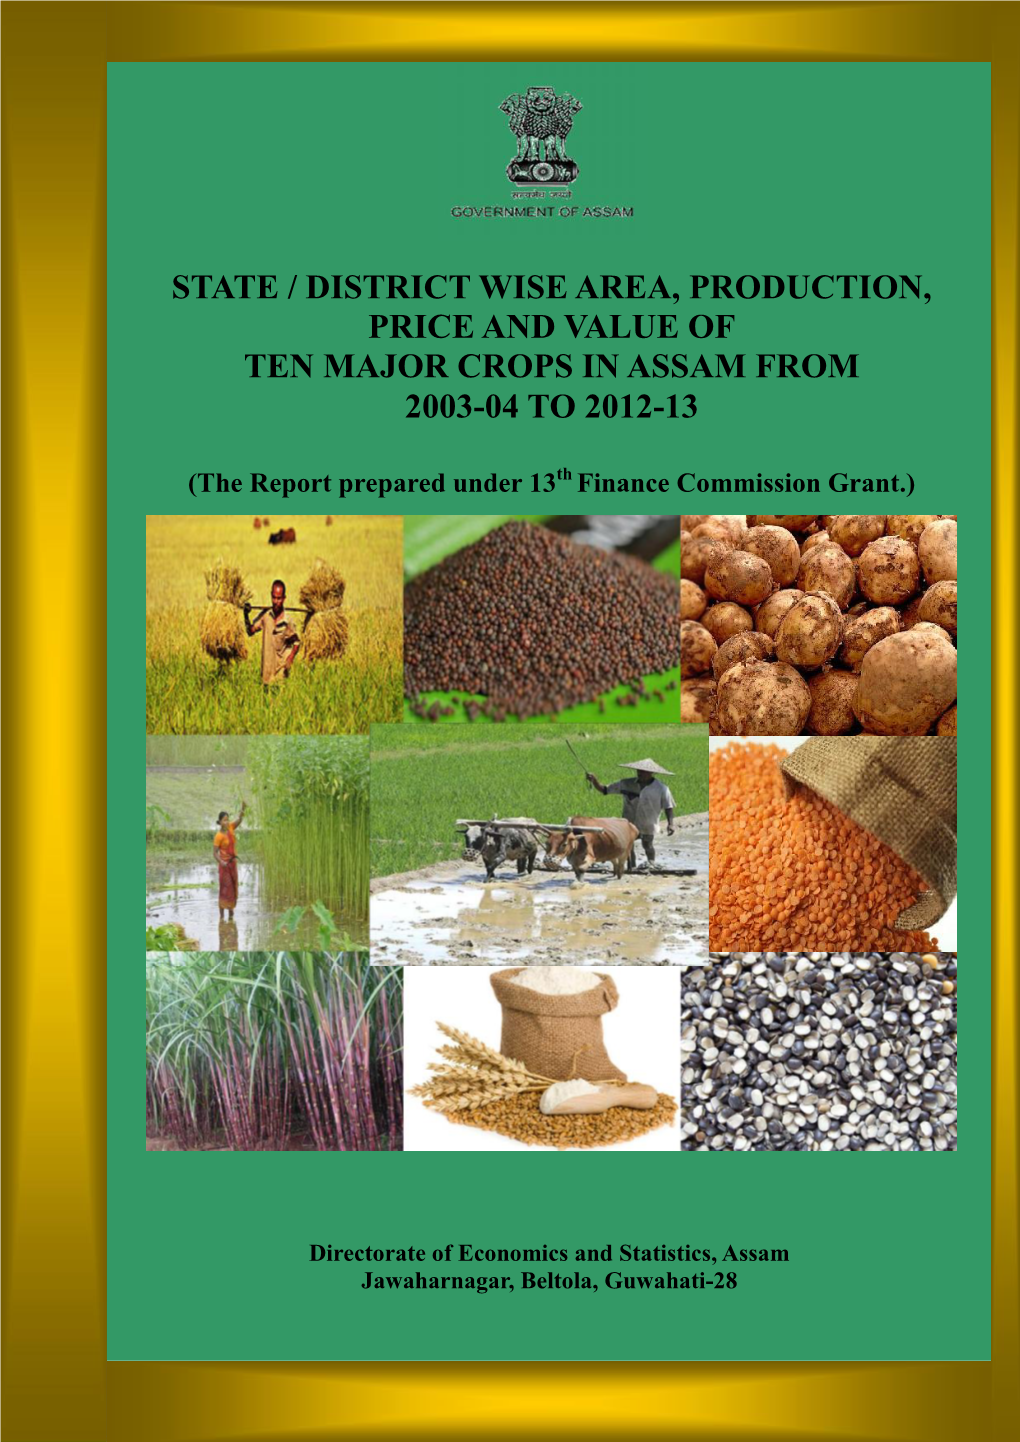 State / District Wise Area, Production, Price and Value of Ten Major Crops in Assam from 2003-04 to 2012-13